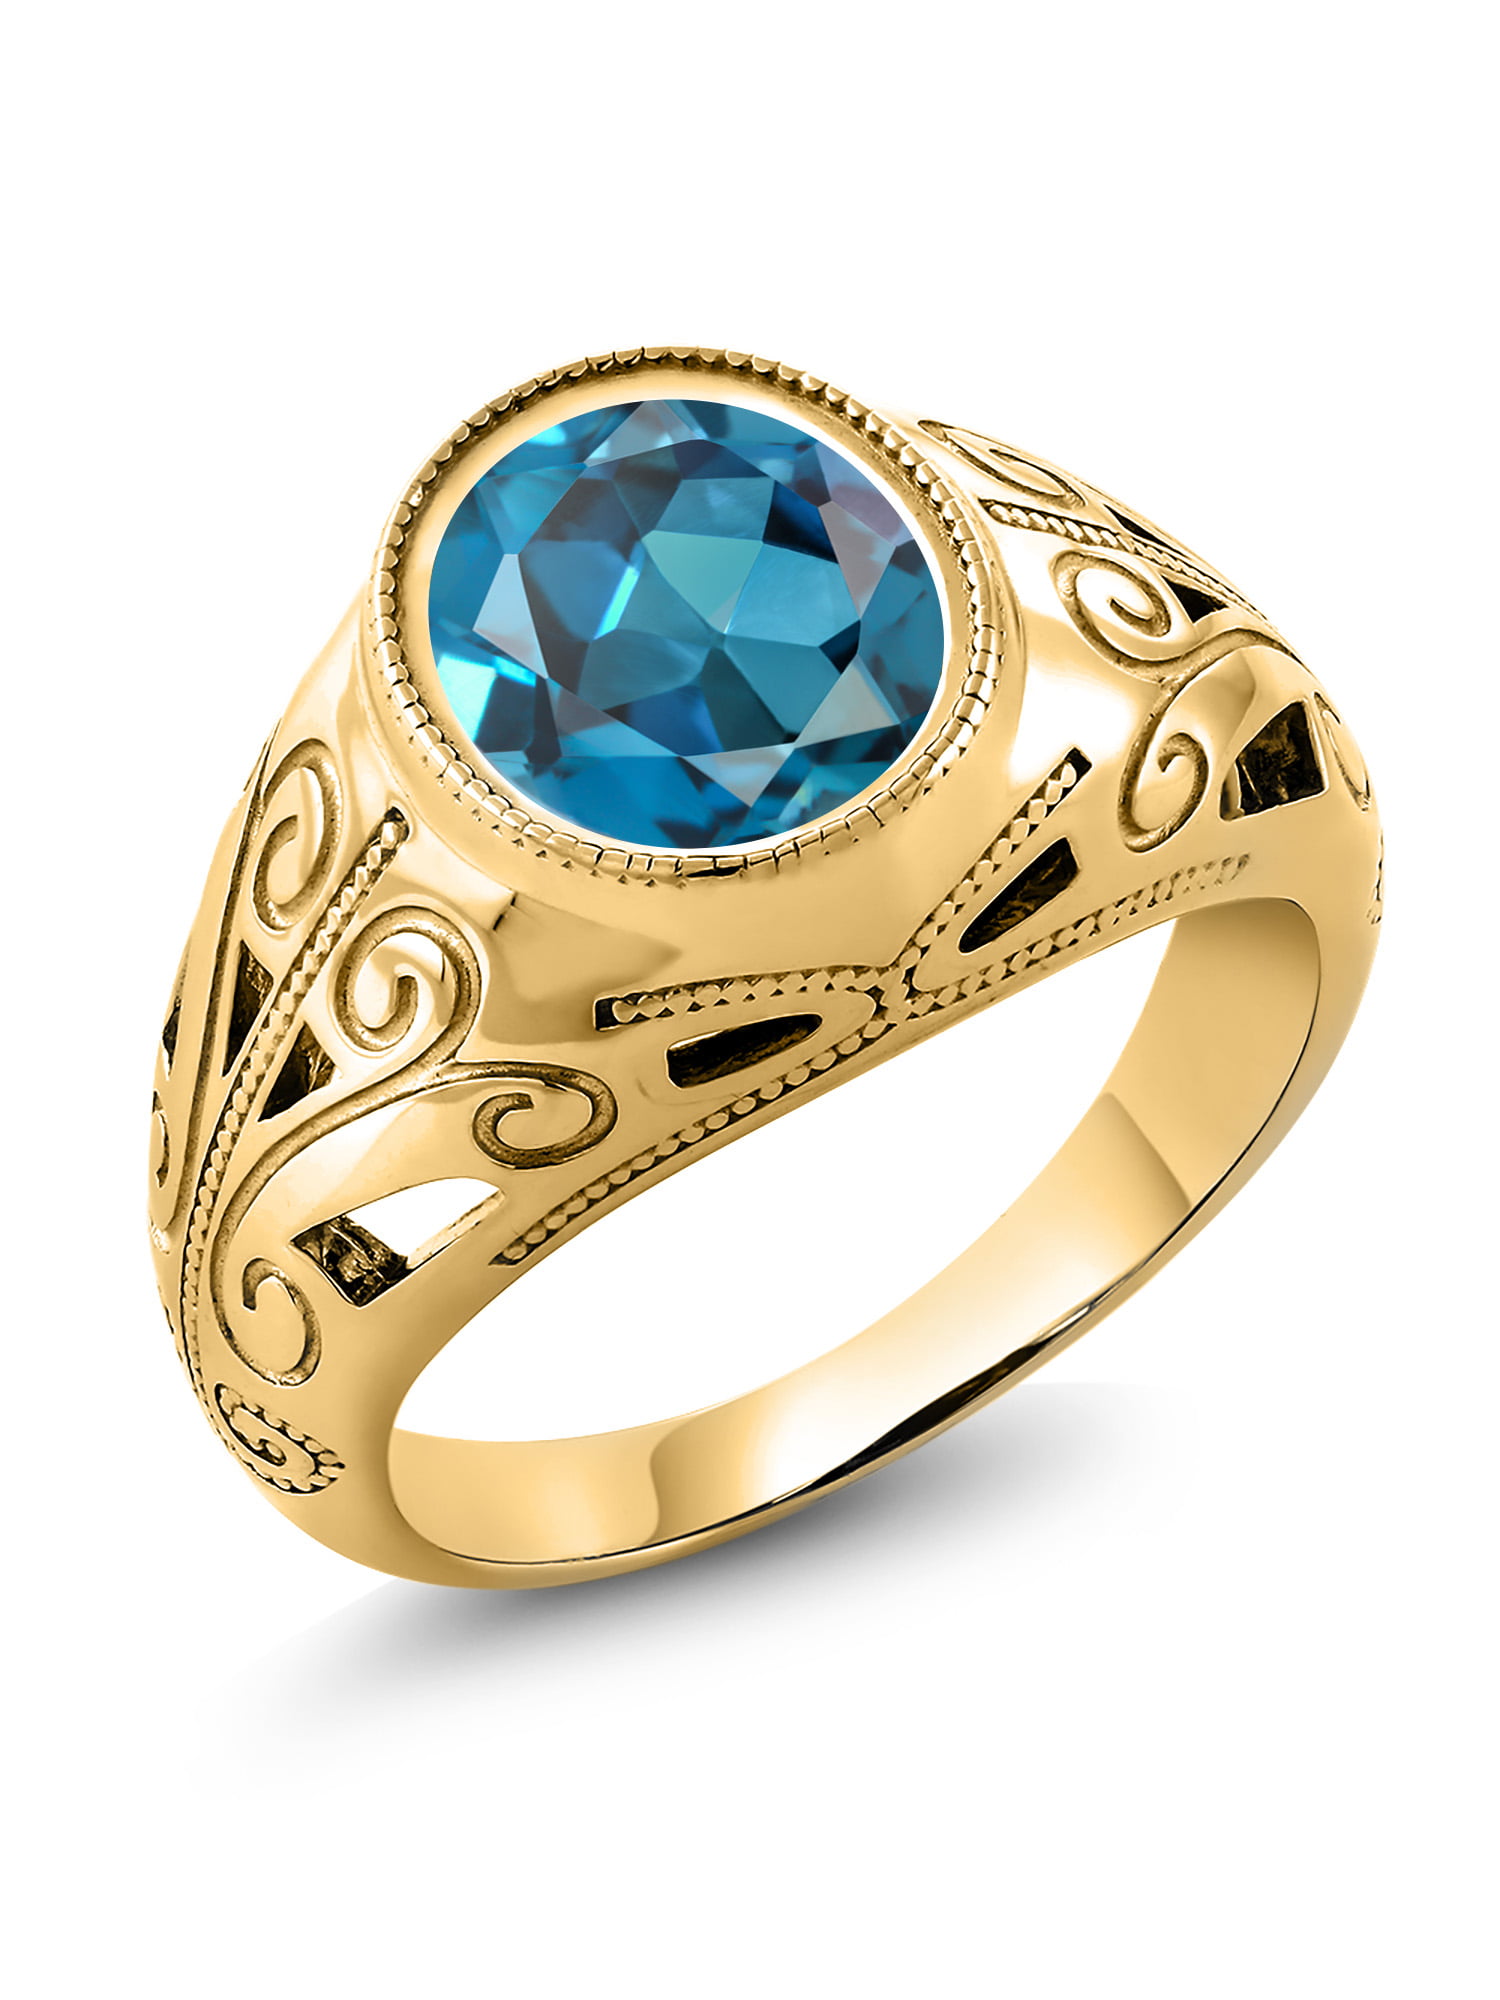 Gem Stone King 6.00 Ct Oval London Blue Topaz 18K Yellow Gold Plated Silver Men's Ring